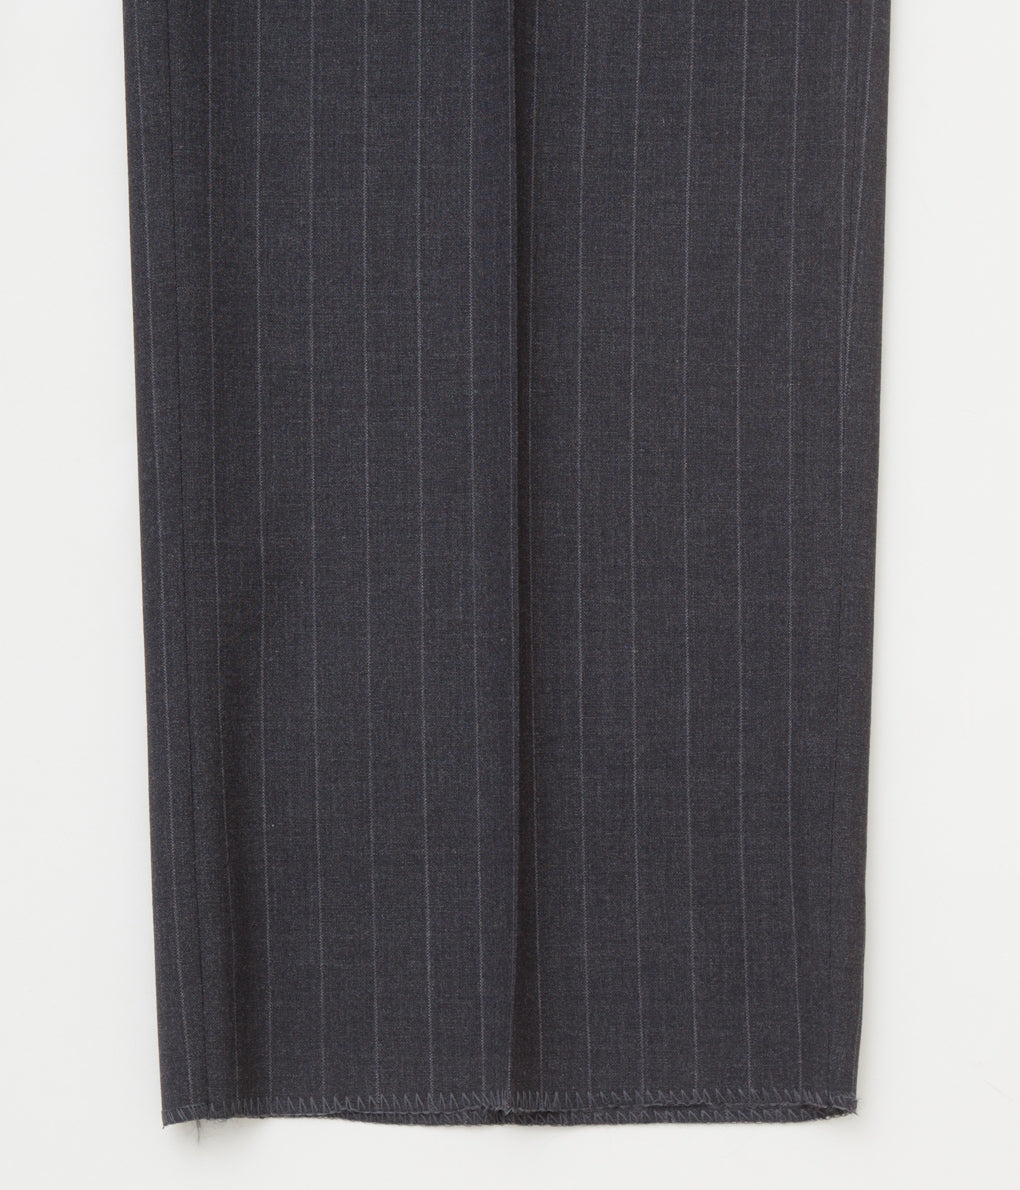 FROM USA "DEAD STOCK BROOKS BROTHERS CHARCOAL STRIPE SUITS(OWN MAKE)"(CHARCOAL)